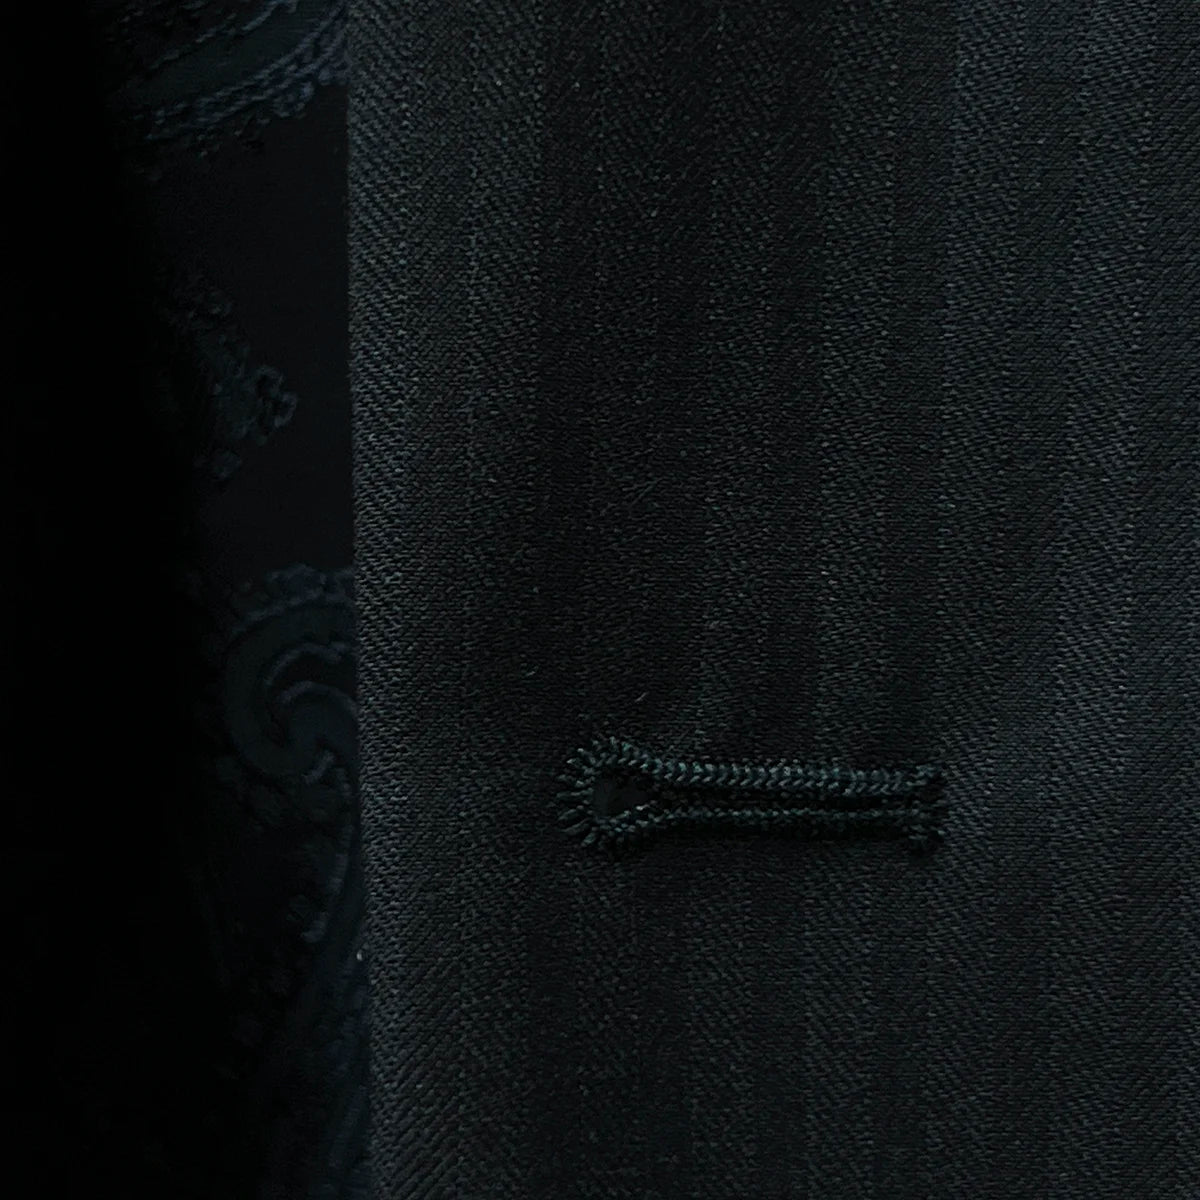 Close-up of a buttonhole on the black herringbone suit.